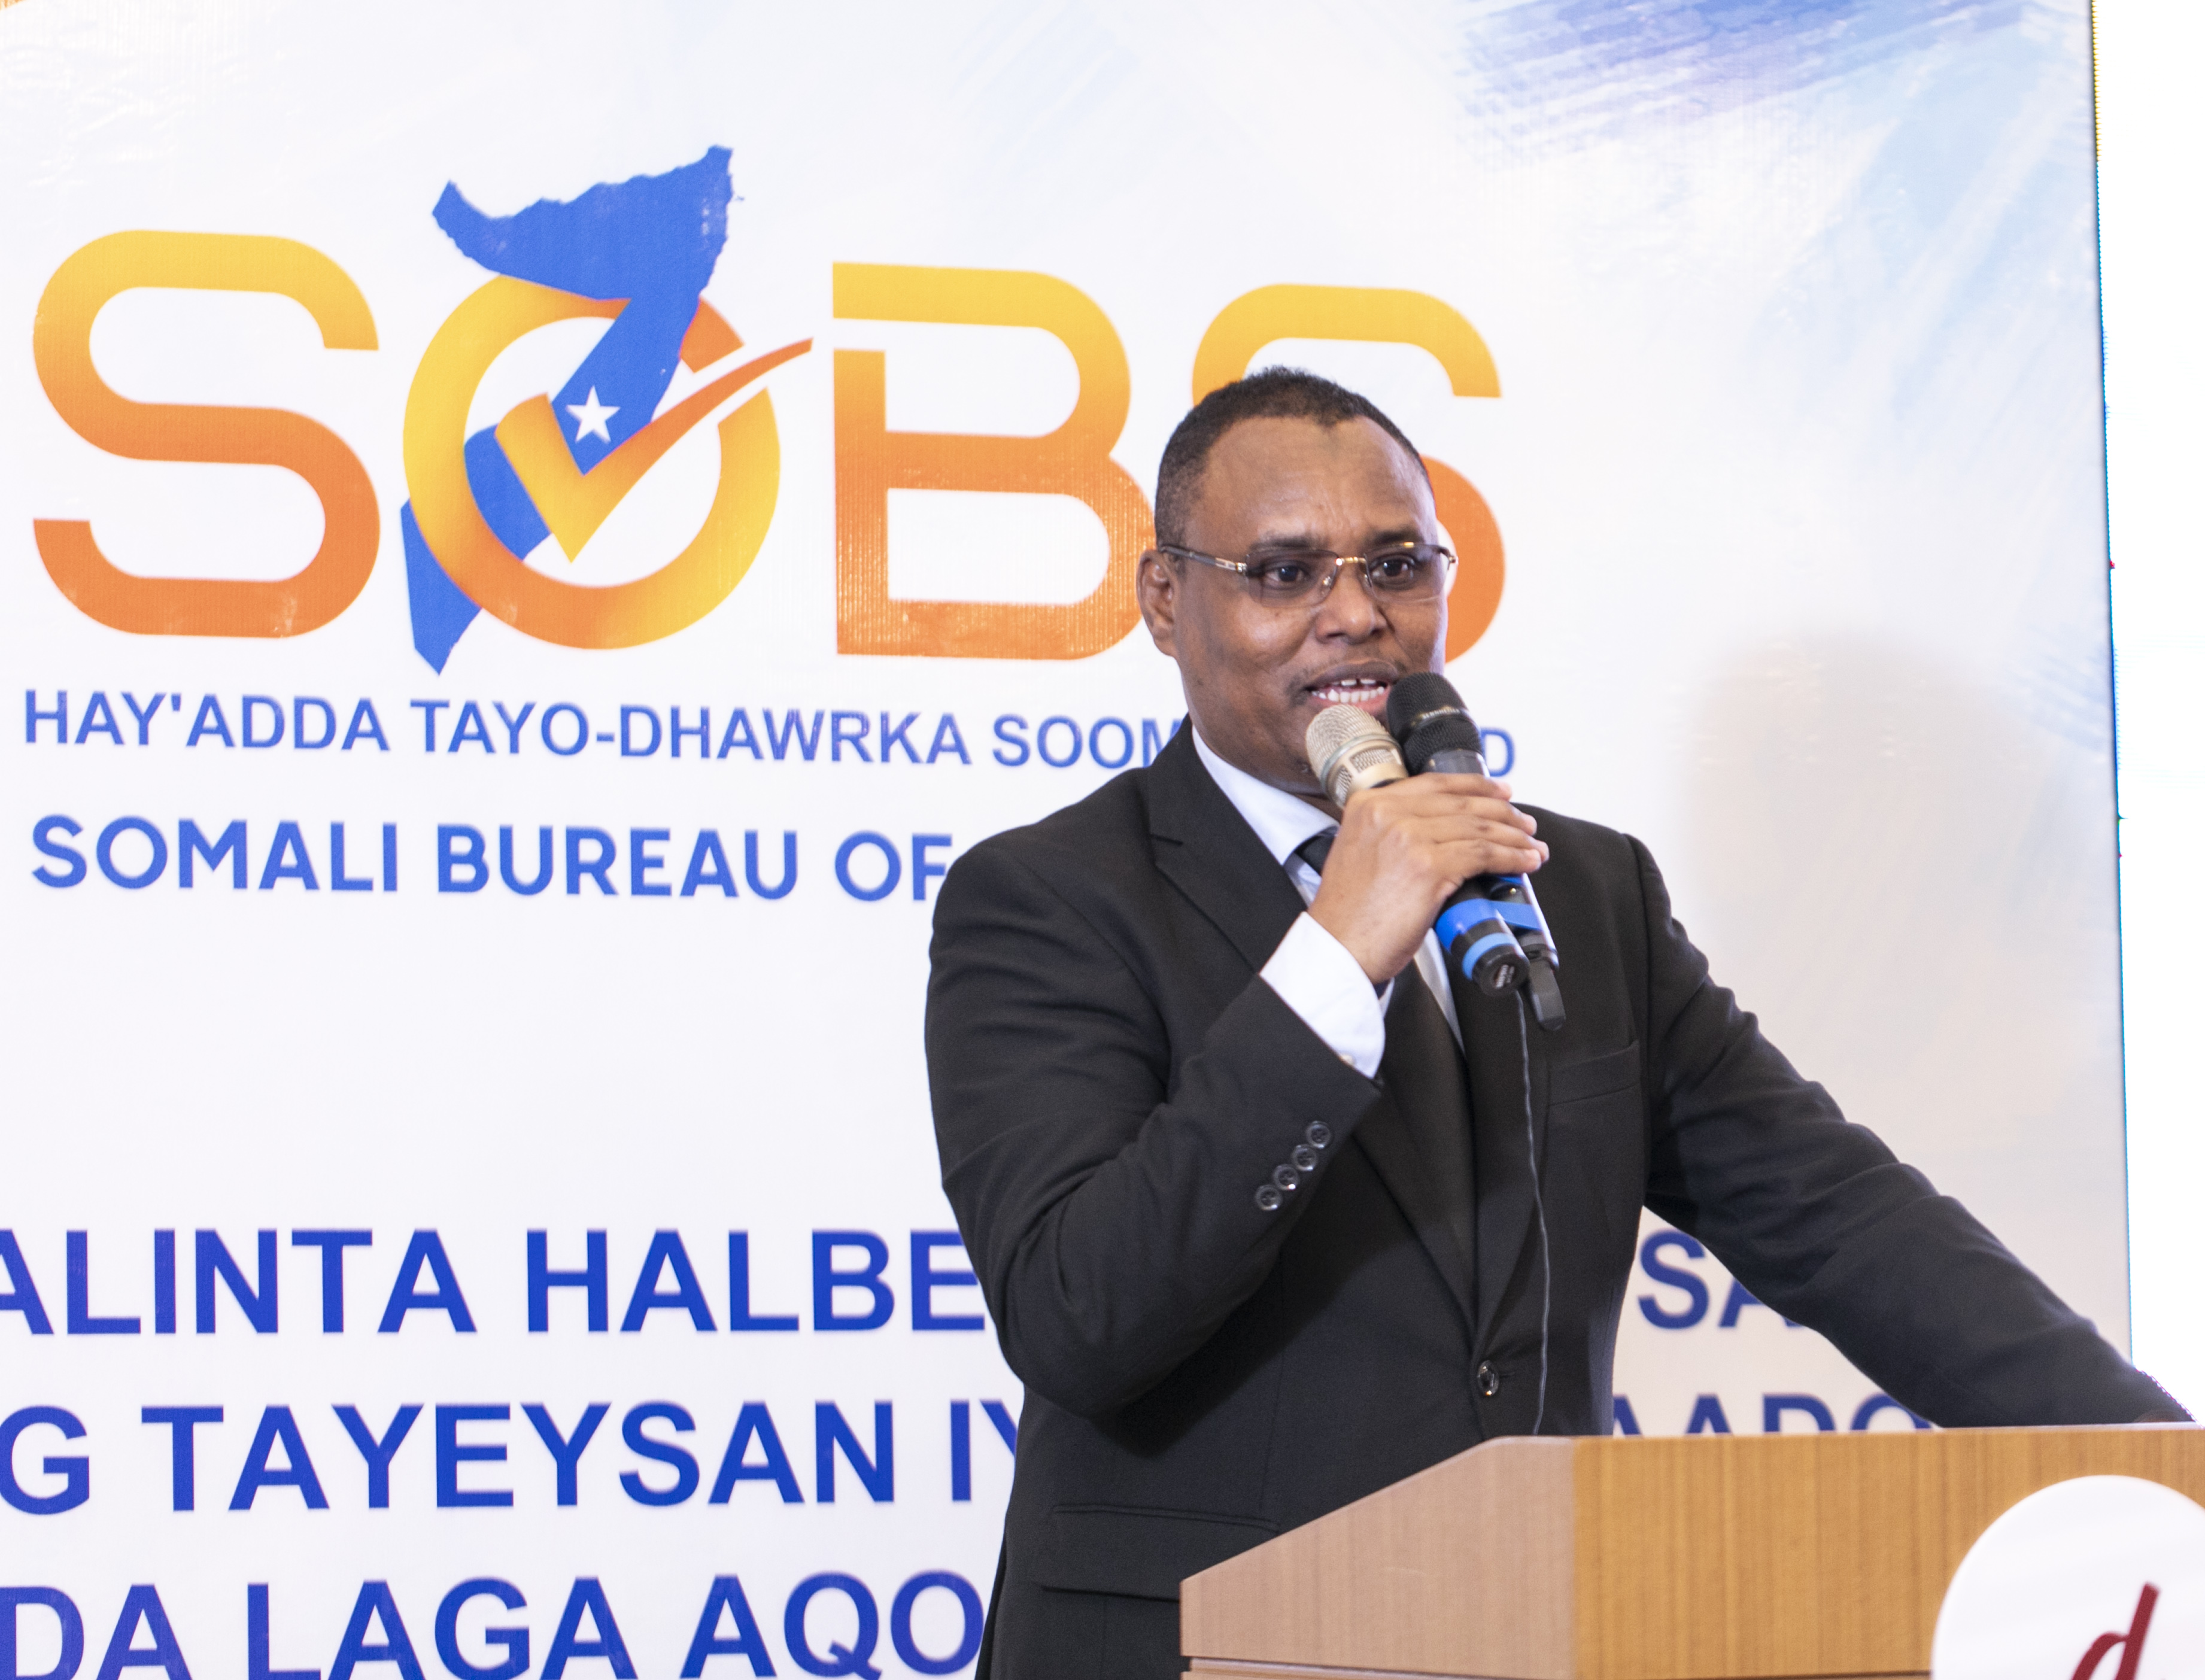 SOBS Launching ceremony